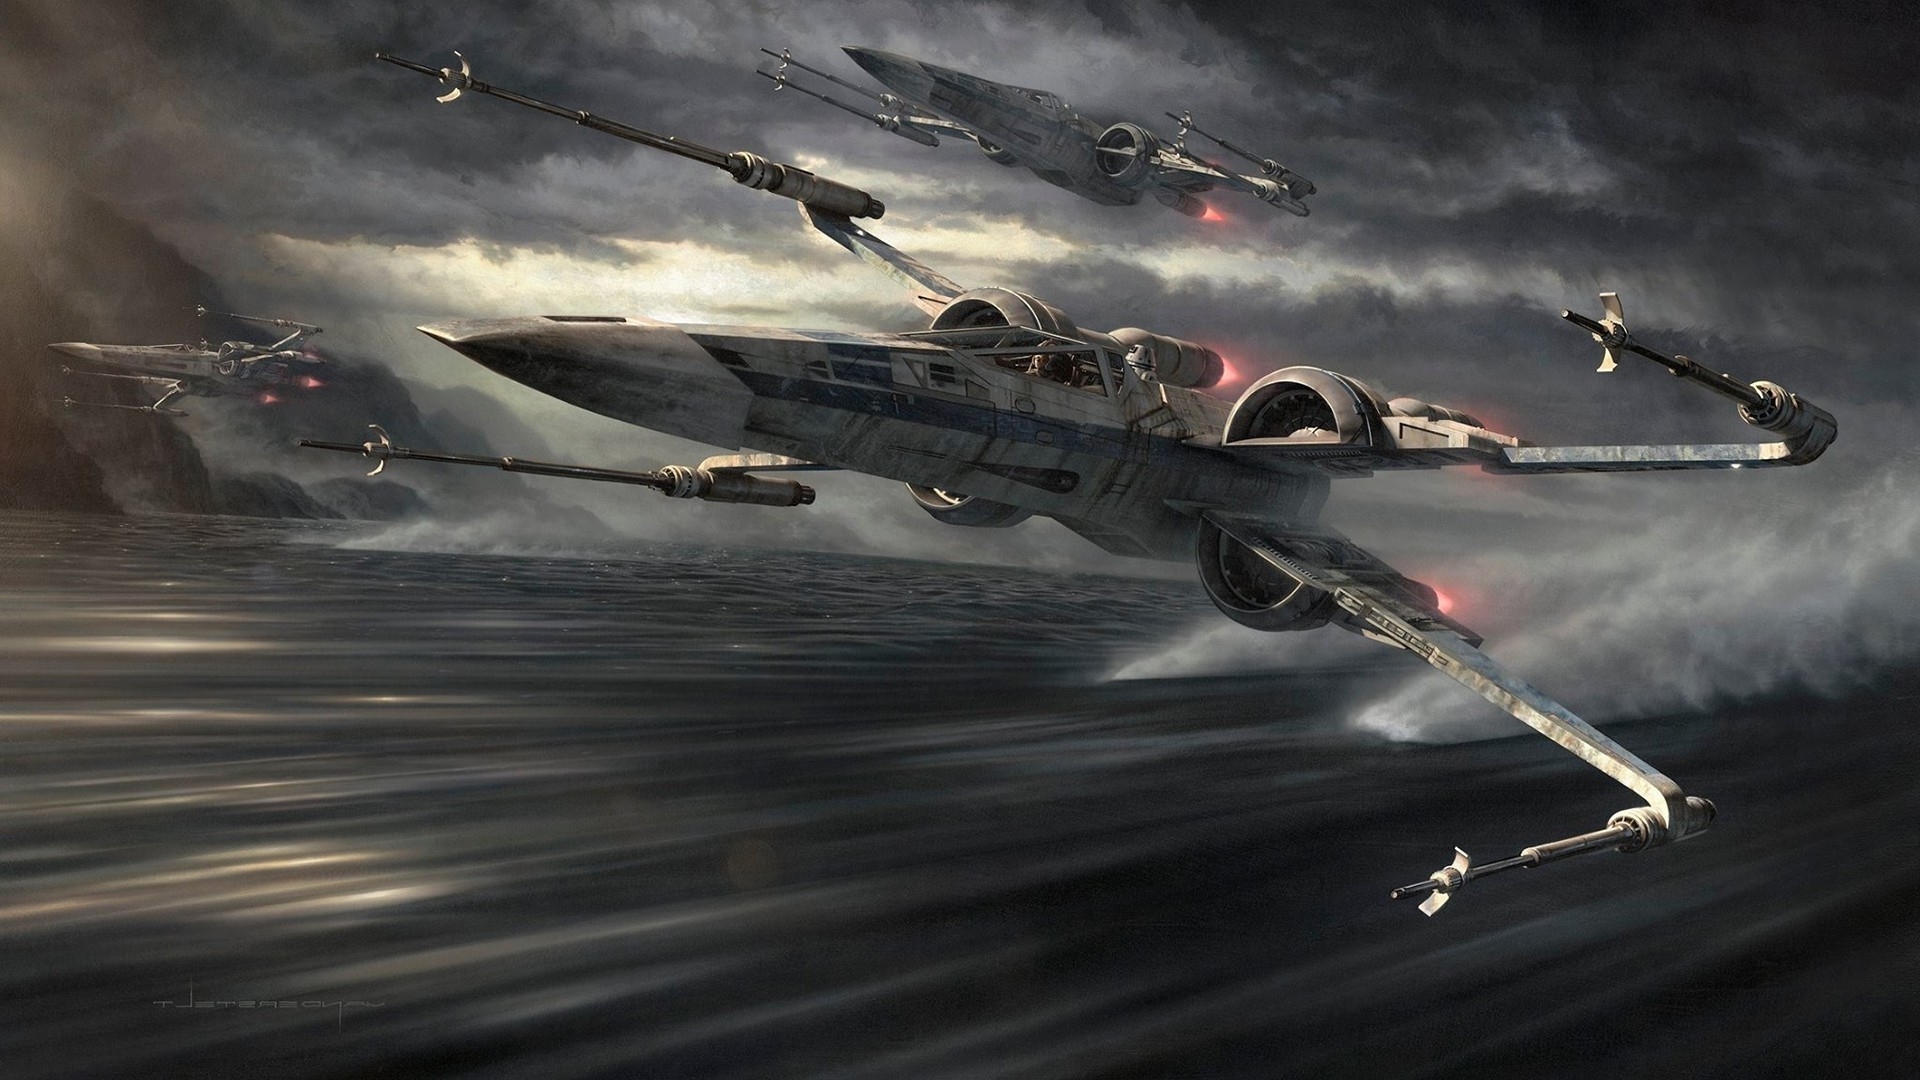 x wing wallpaper hd (62+ images)